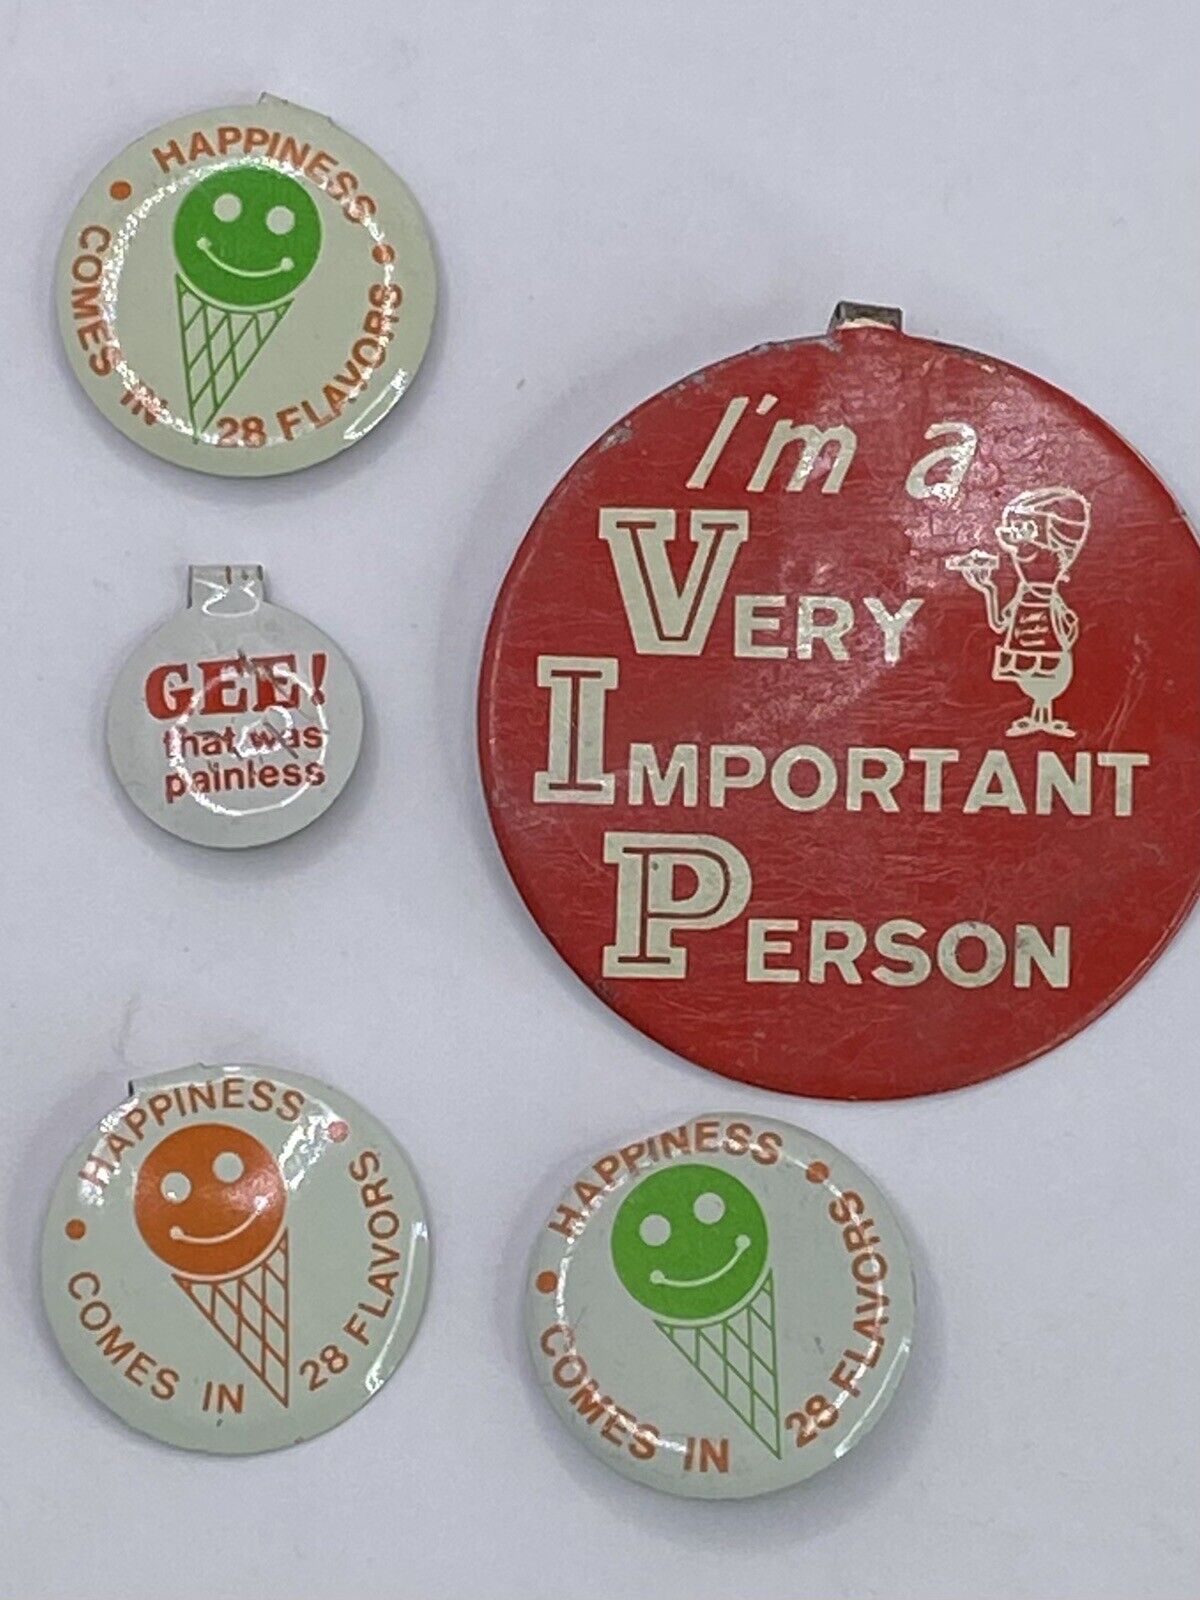 Vintage 1970s Howard Johnson's Happiness Comes In 28 Flavors Foldover Badge Pin